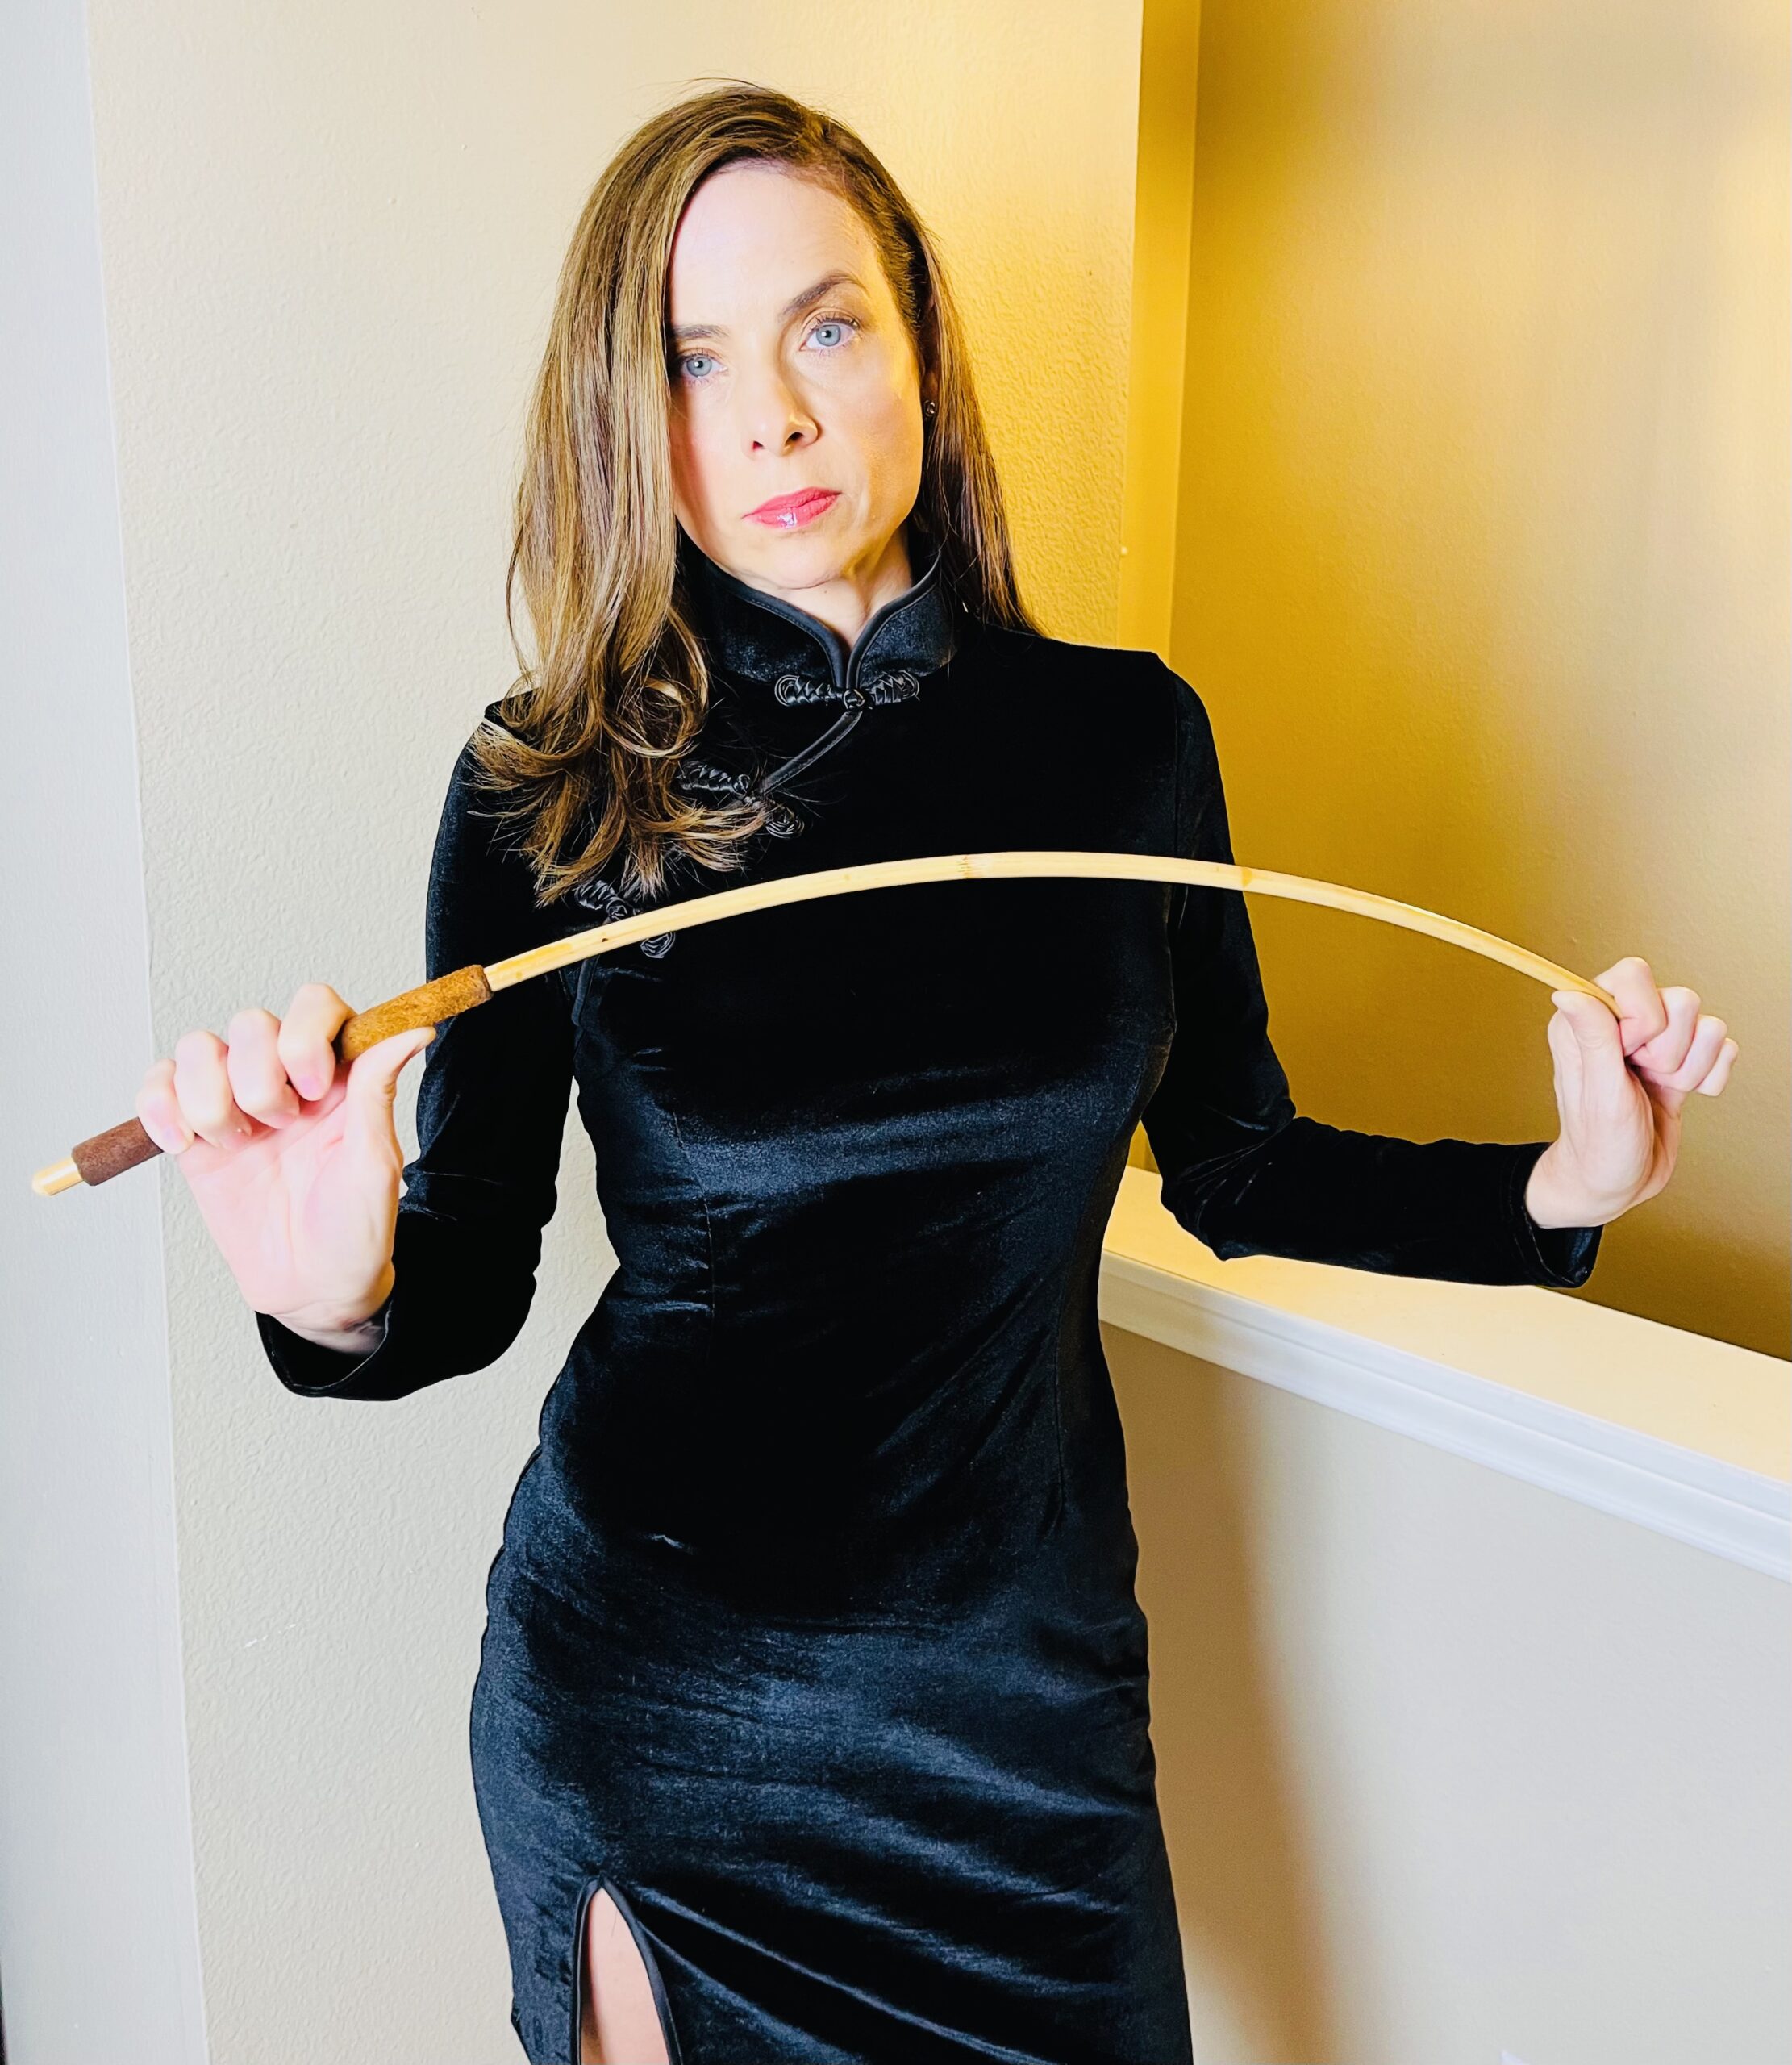 Strict mistress caning